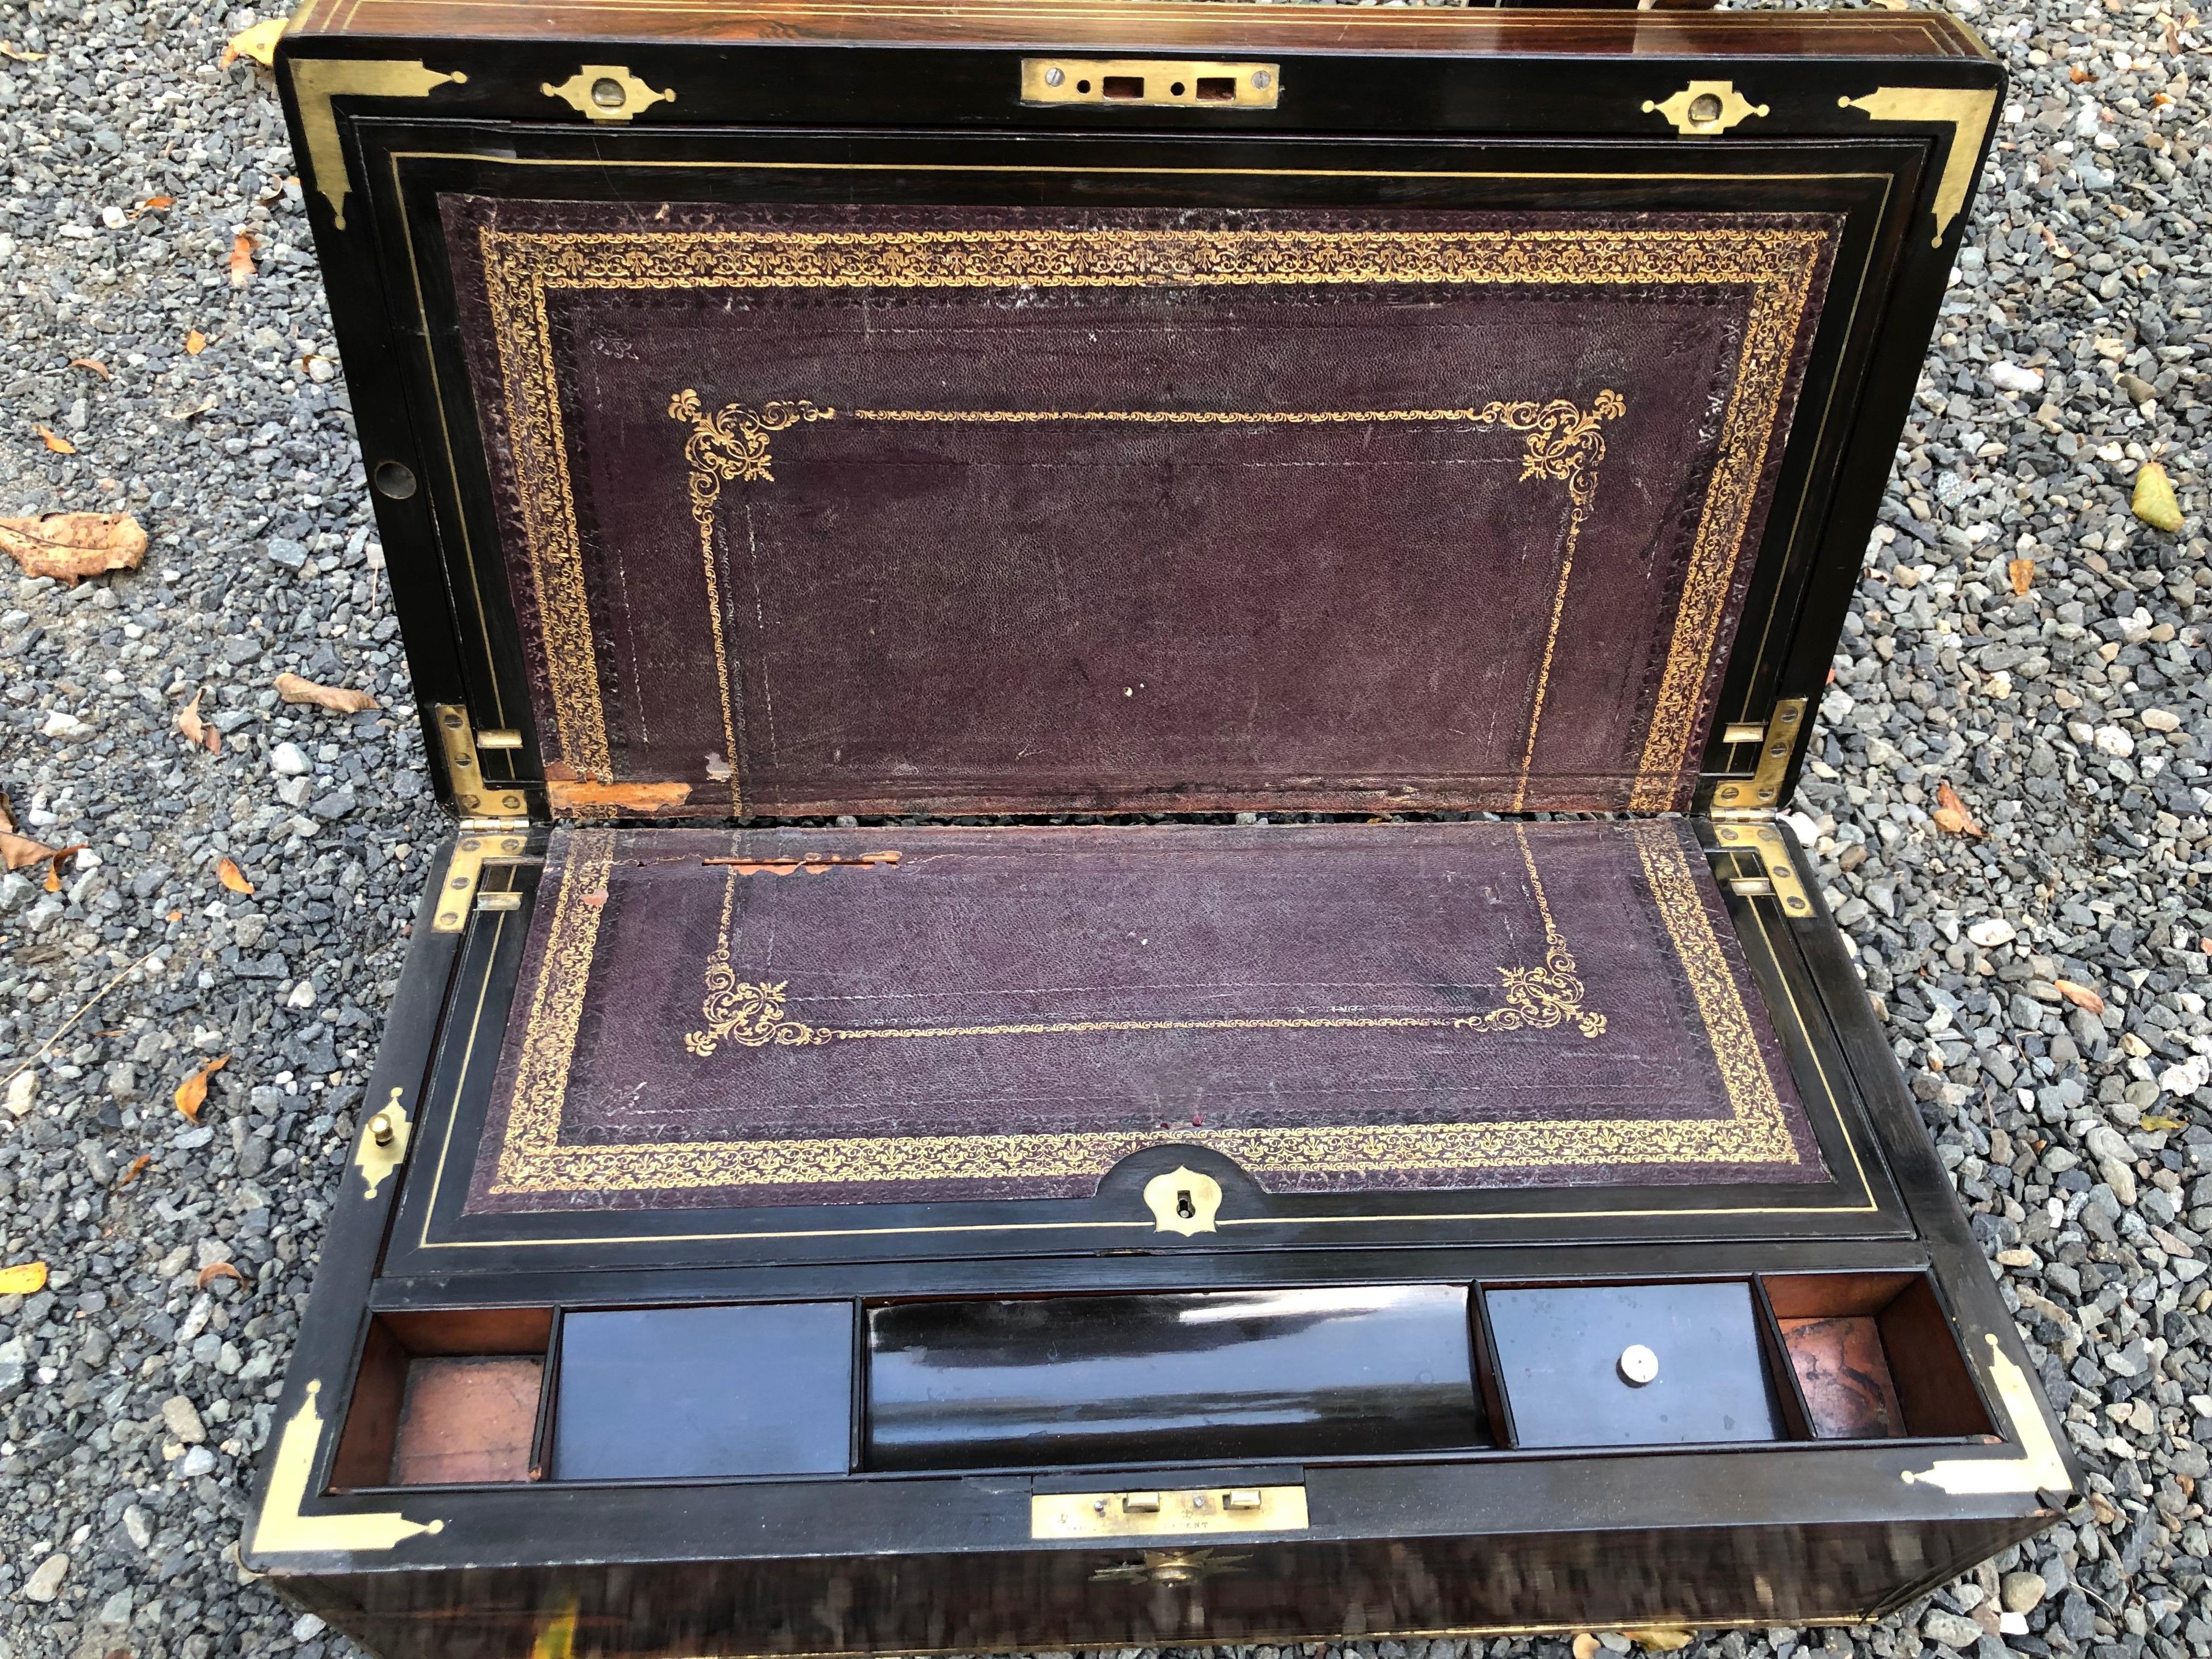 English mahogany lap desk, brass bound with inlaid brass stringing and brass presentation plaque. There are compartments for ink wells, writing instruments and paper. The custom stand, made approximately 30 years ago, is mahogany with fretwork under